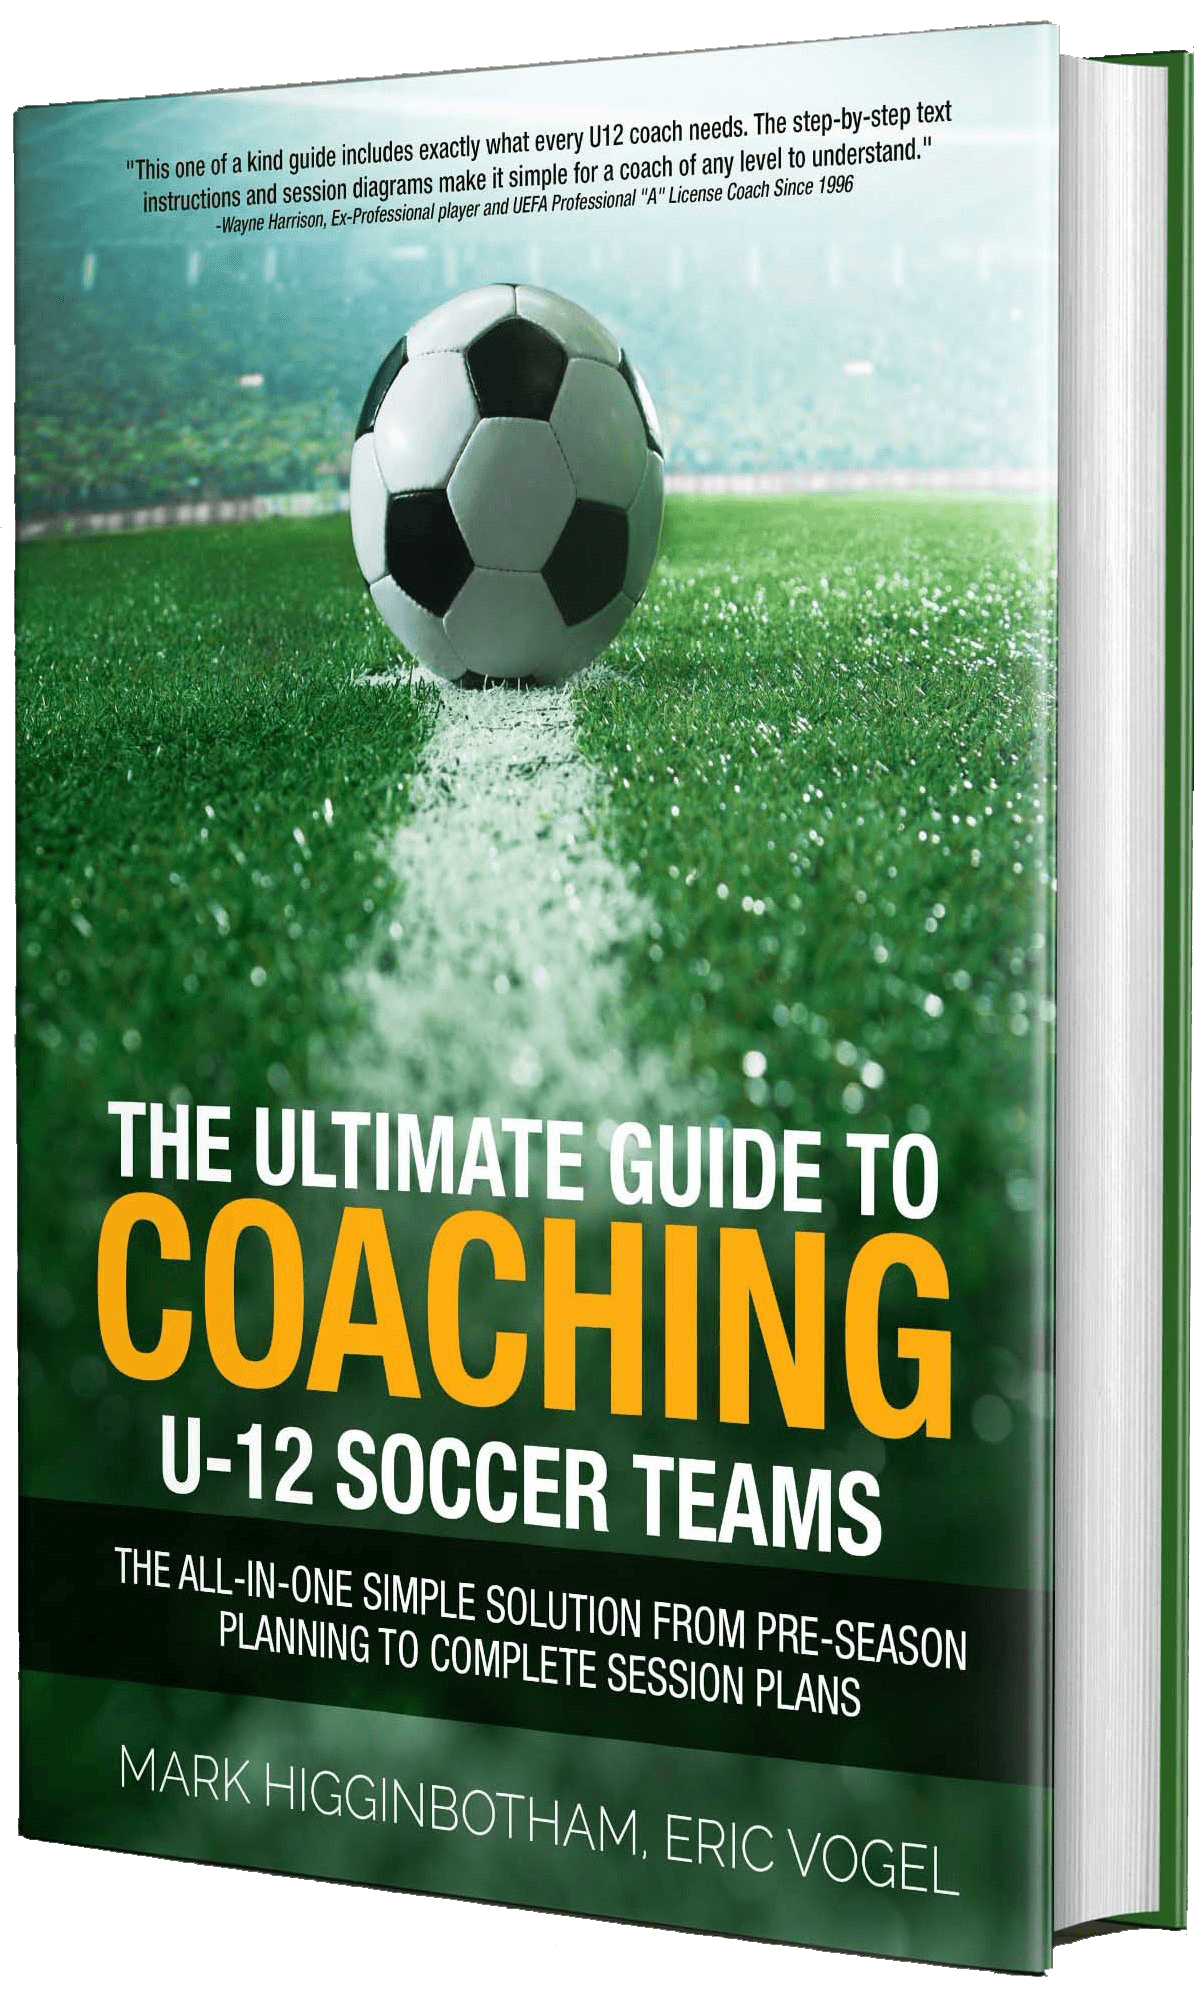 How to keep your subs involved - Coaching Advice - Soccer Coach Weekly